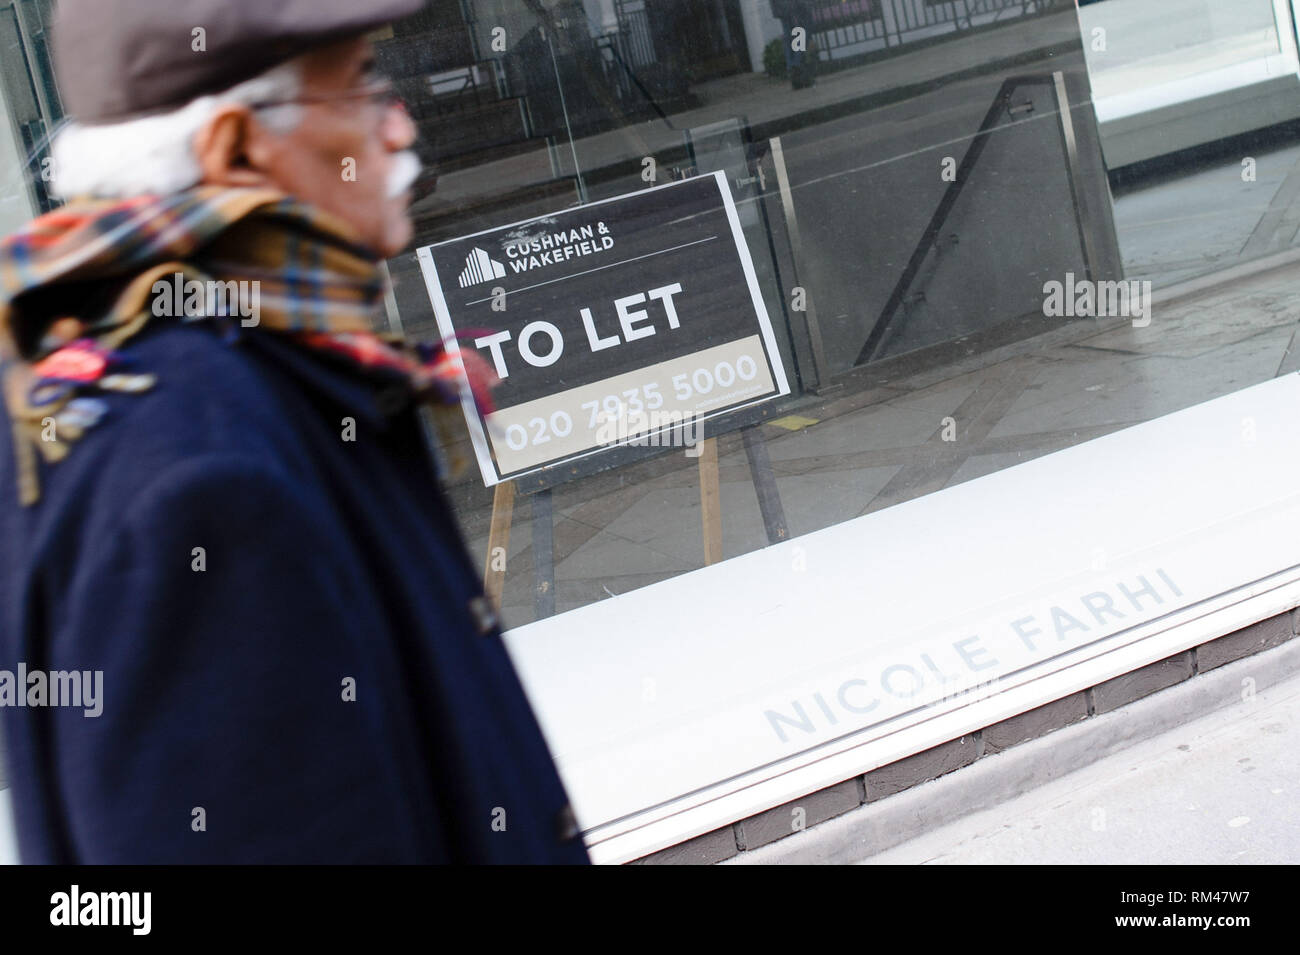 February 9, 2019 - London, United Kingdom - A man seen walking past a vacant store, previously a branch of designer clothing retailer Nicole Farhi, on Conduit Street in central London..February 15 sees the release of the first monthly retail sales figures of the year (for January) from the UK's Office for National Statistics. December figures revealed a 0.9 percent fall in sales from the month before, which saw a 1.4 percent rise widely attributed to the impact of 'Black Friday' deals encouraging earlier Christmas shopping. More generally, with a potential no-deal departure from the EU growing Stock Photo